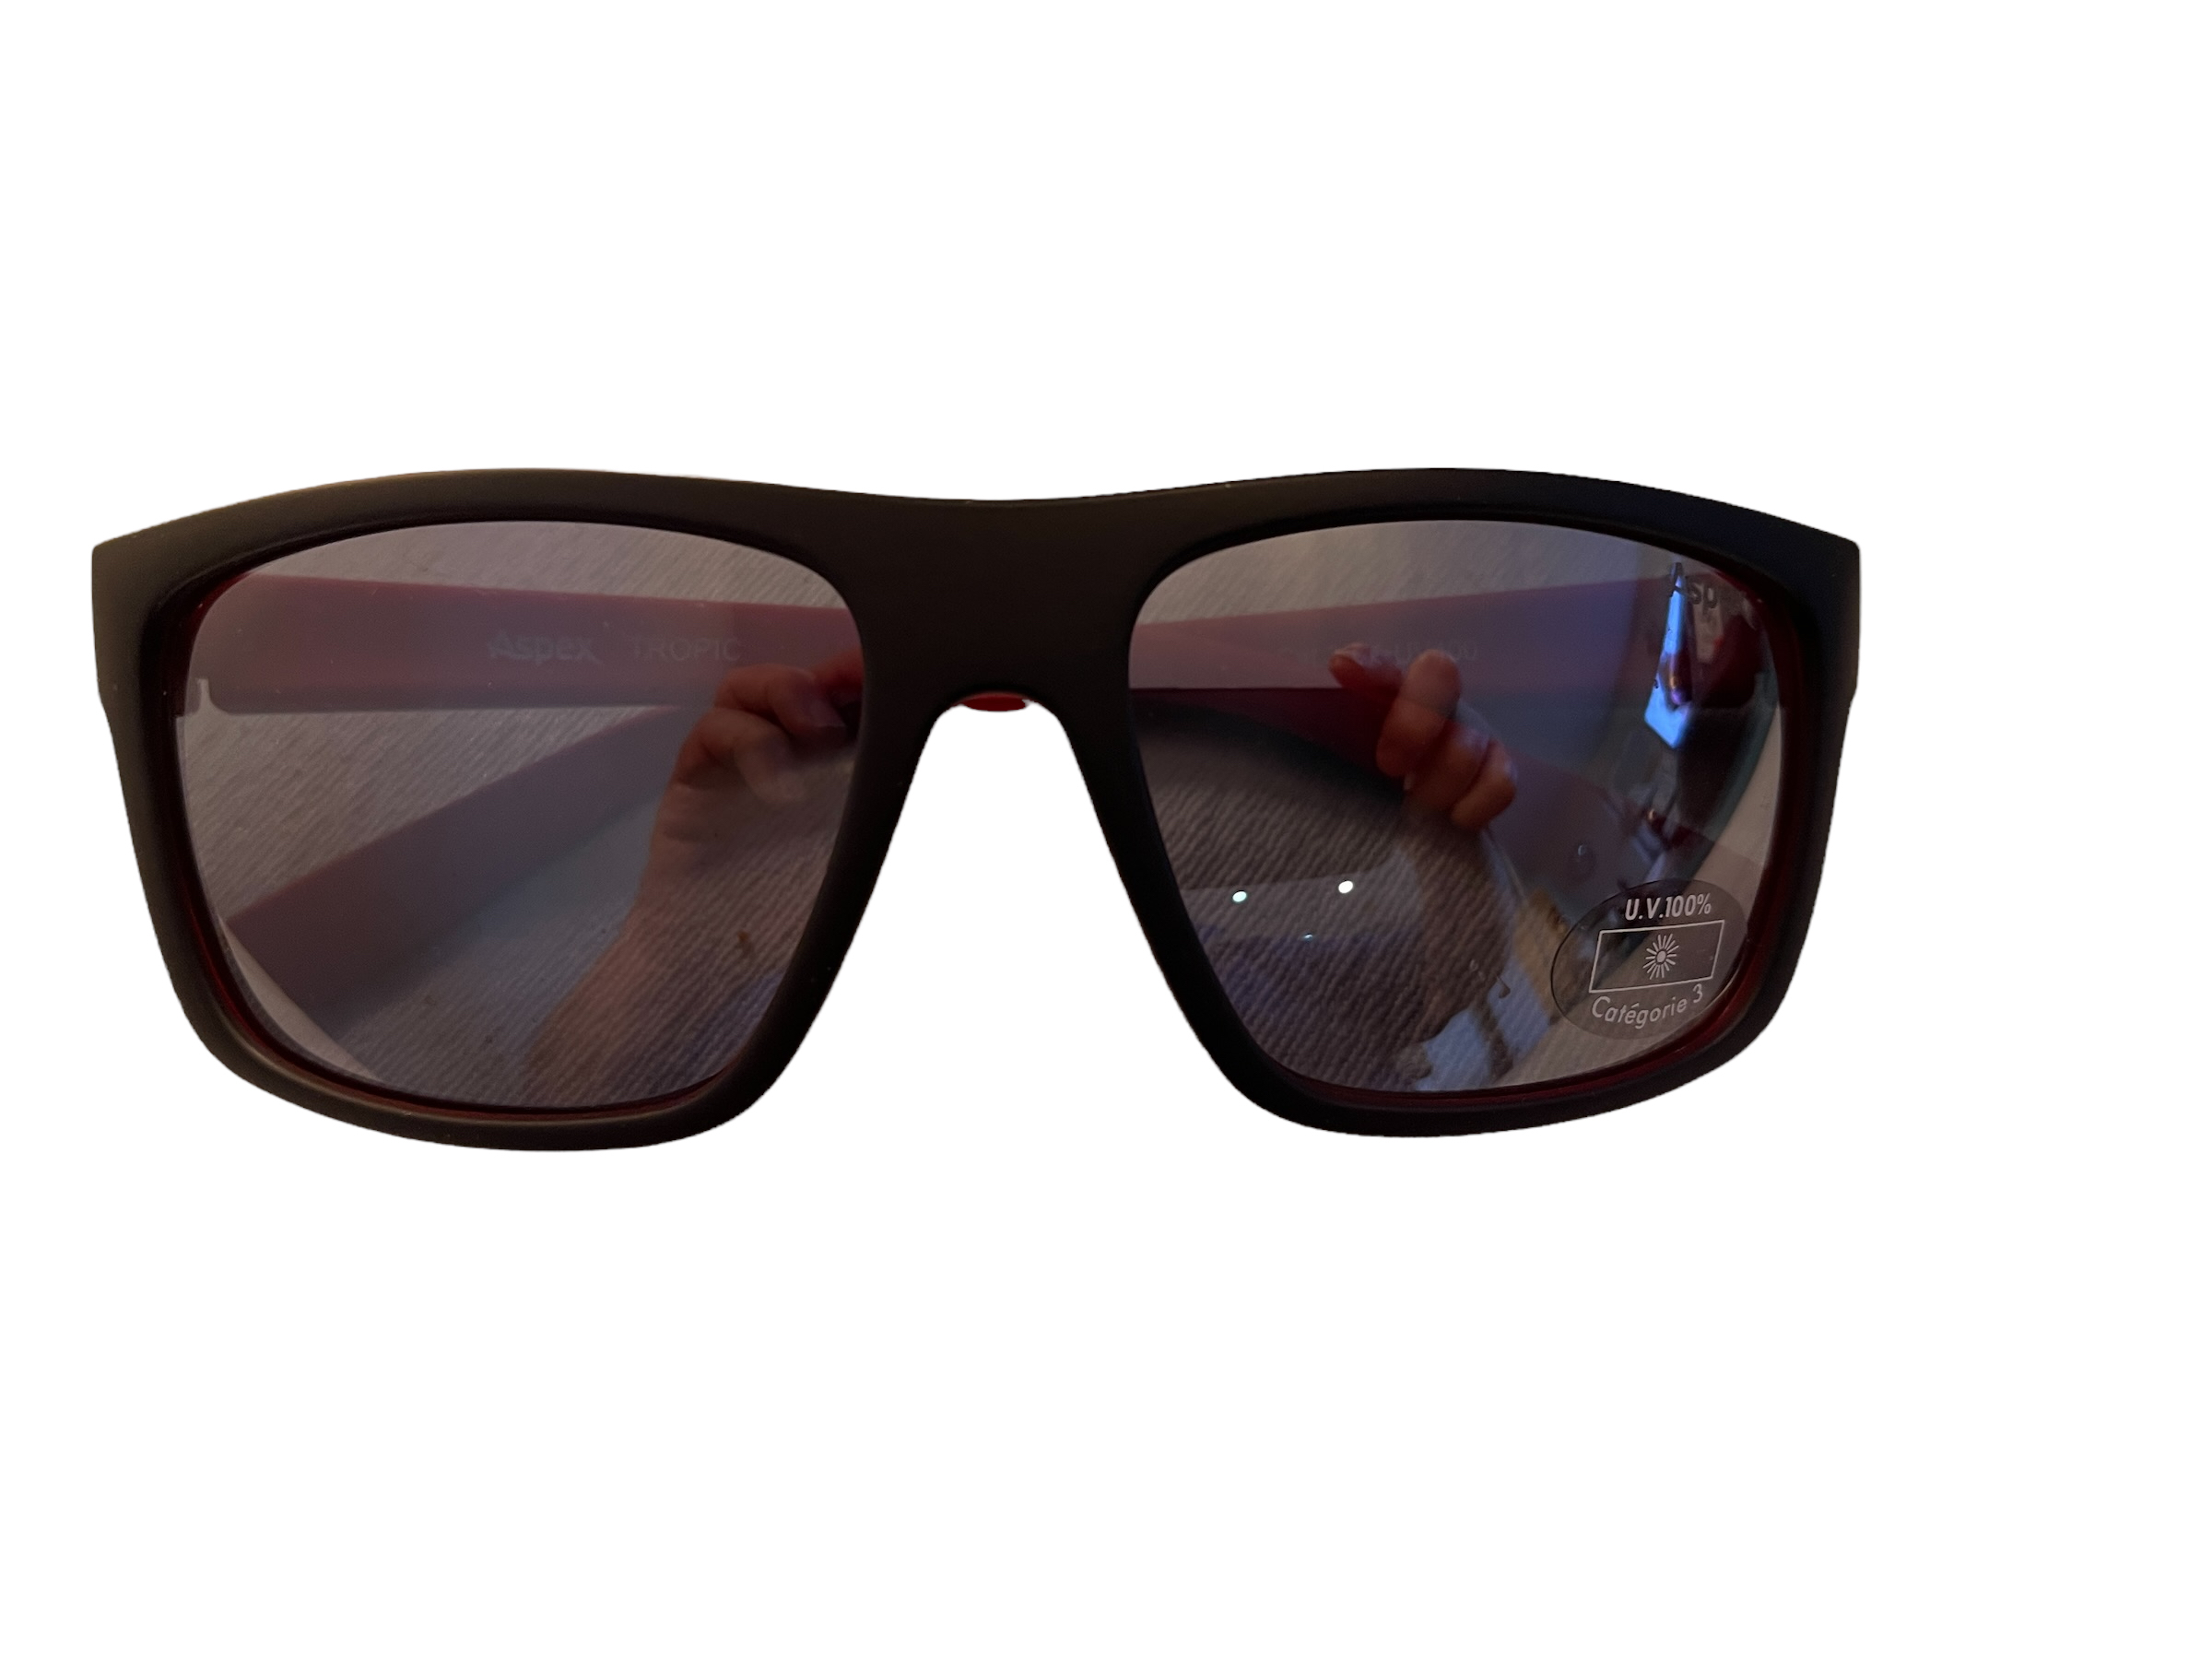 Aspex Tropic Sunglasses from Our Private Jet Charter Ex Demo or Surplus Stock